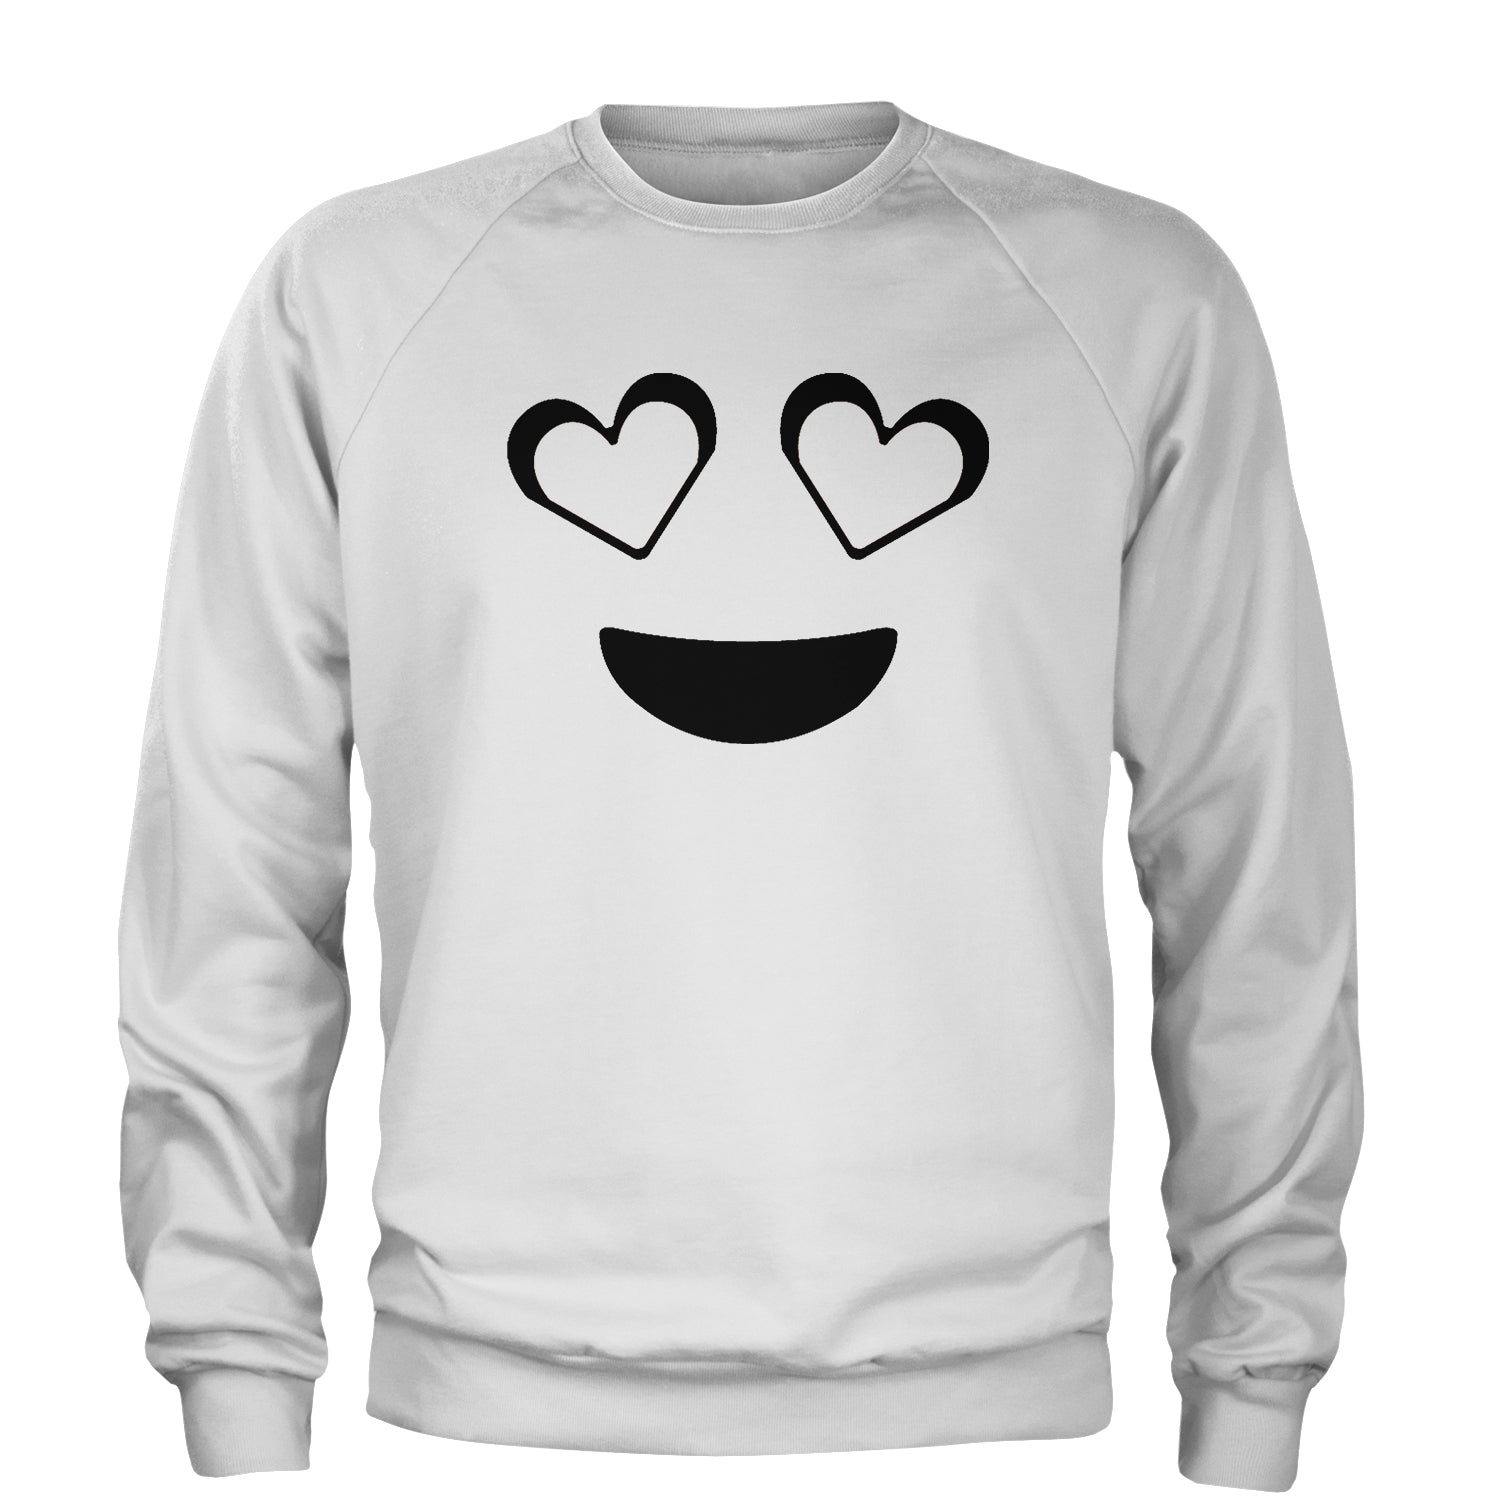 Emoticon Heart Eyes Smile Face Adult Crewneck Sweatshirt cosplay, costume, dress, emoji, emote, face, halloween, Smile, up, yellow by Expression Tees